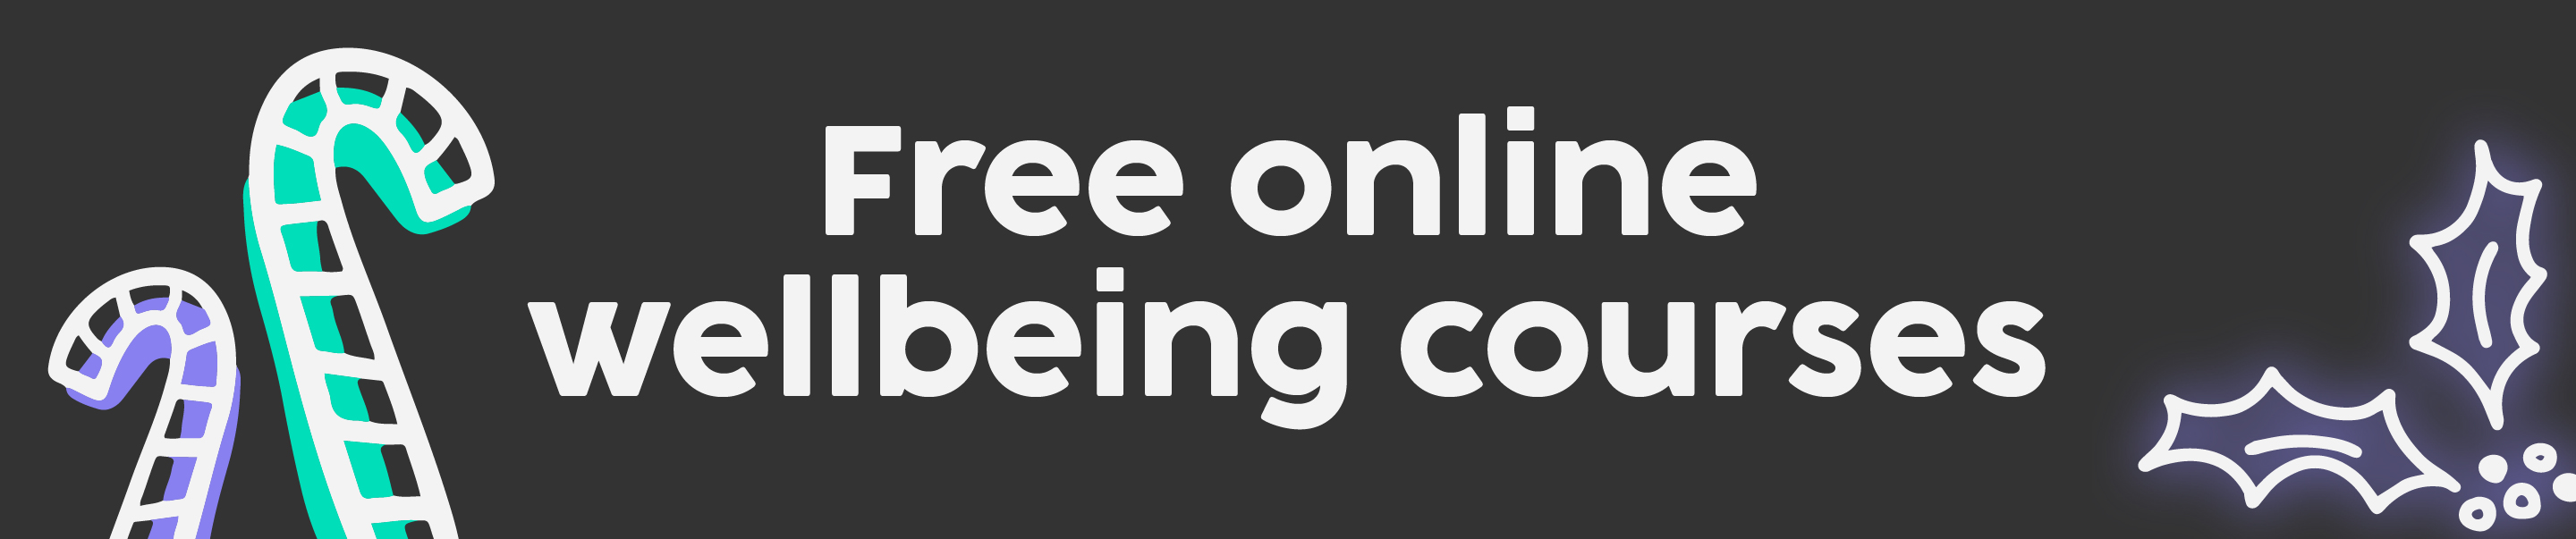 free online wellbeing courses